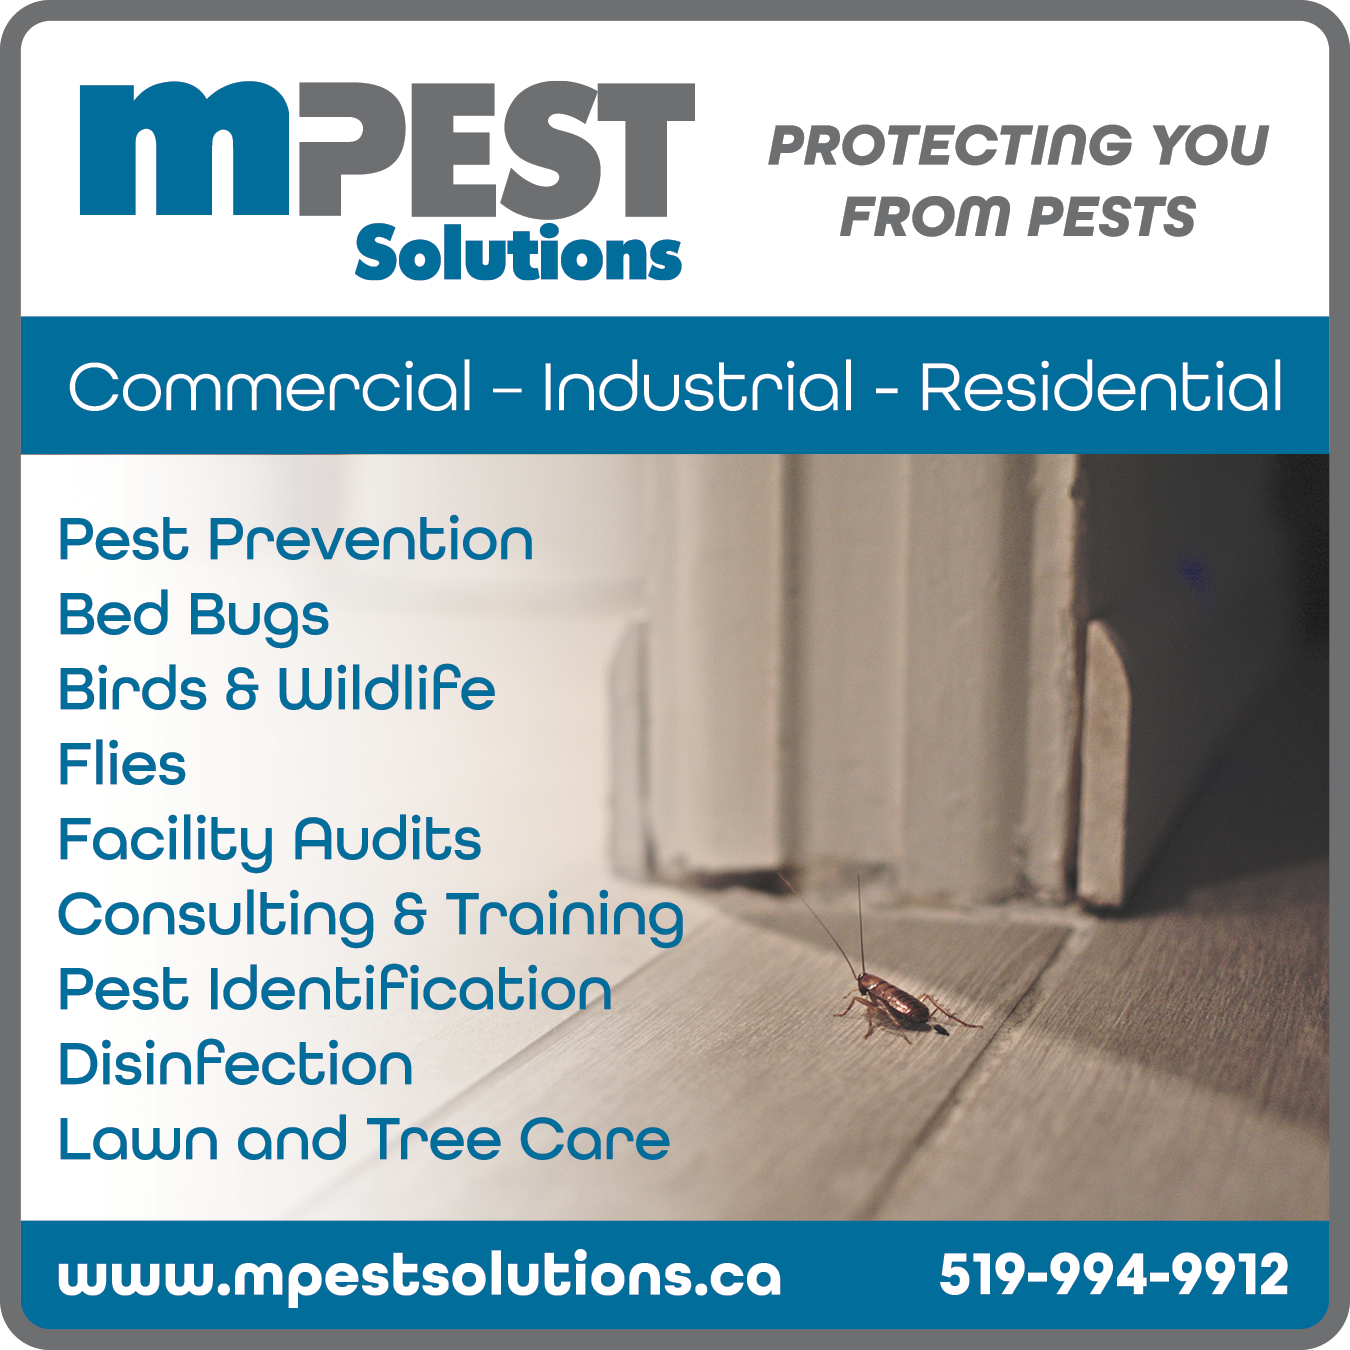 MPest Solutions